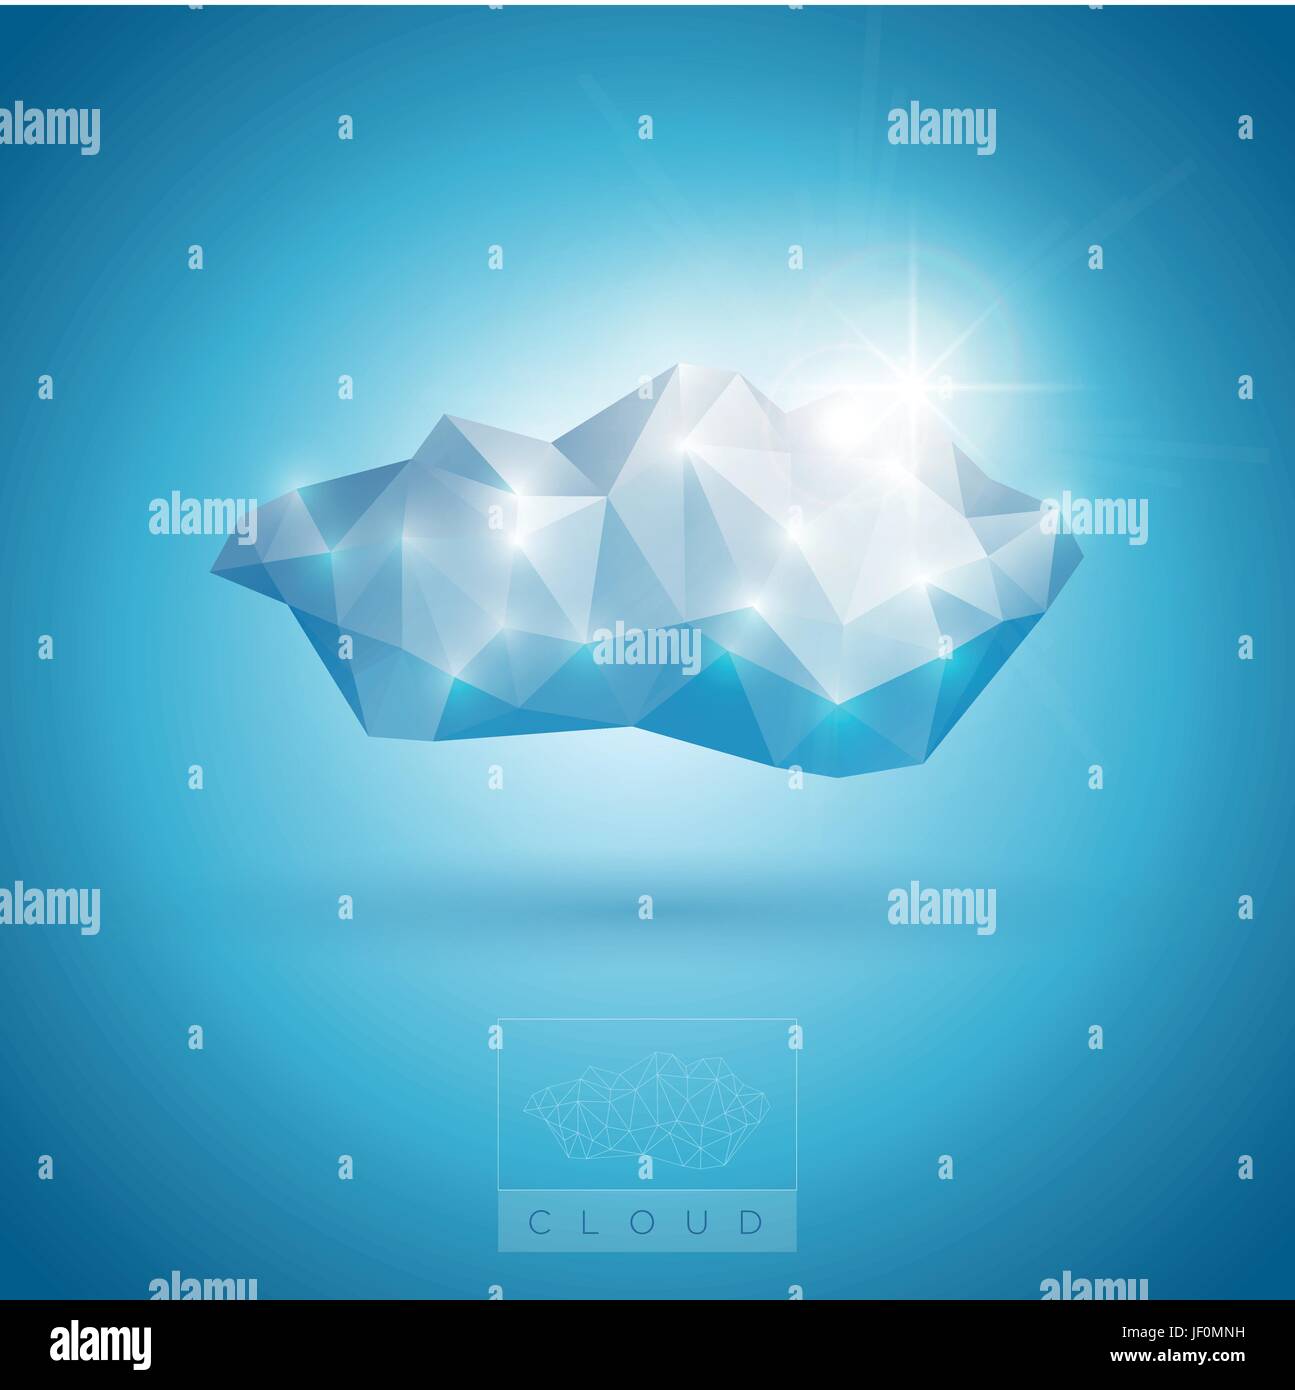 blue, art, graphic, cloud, illustration, connection, connectivity, interface, Stock Vector